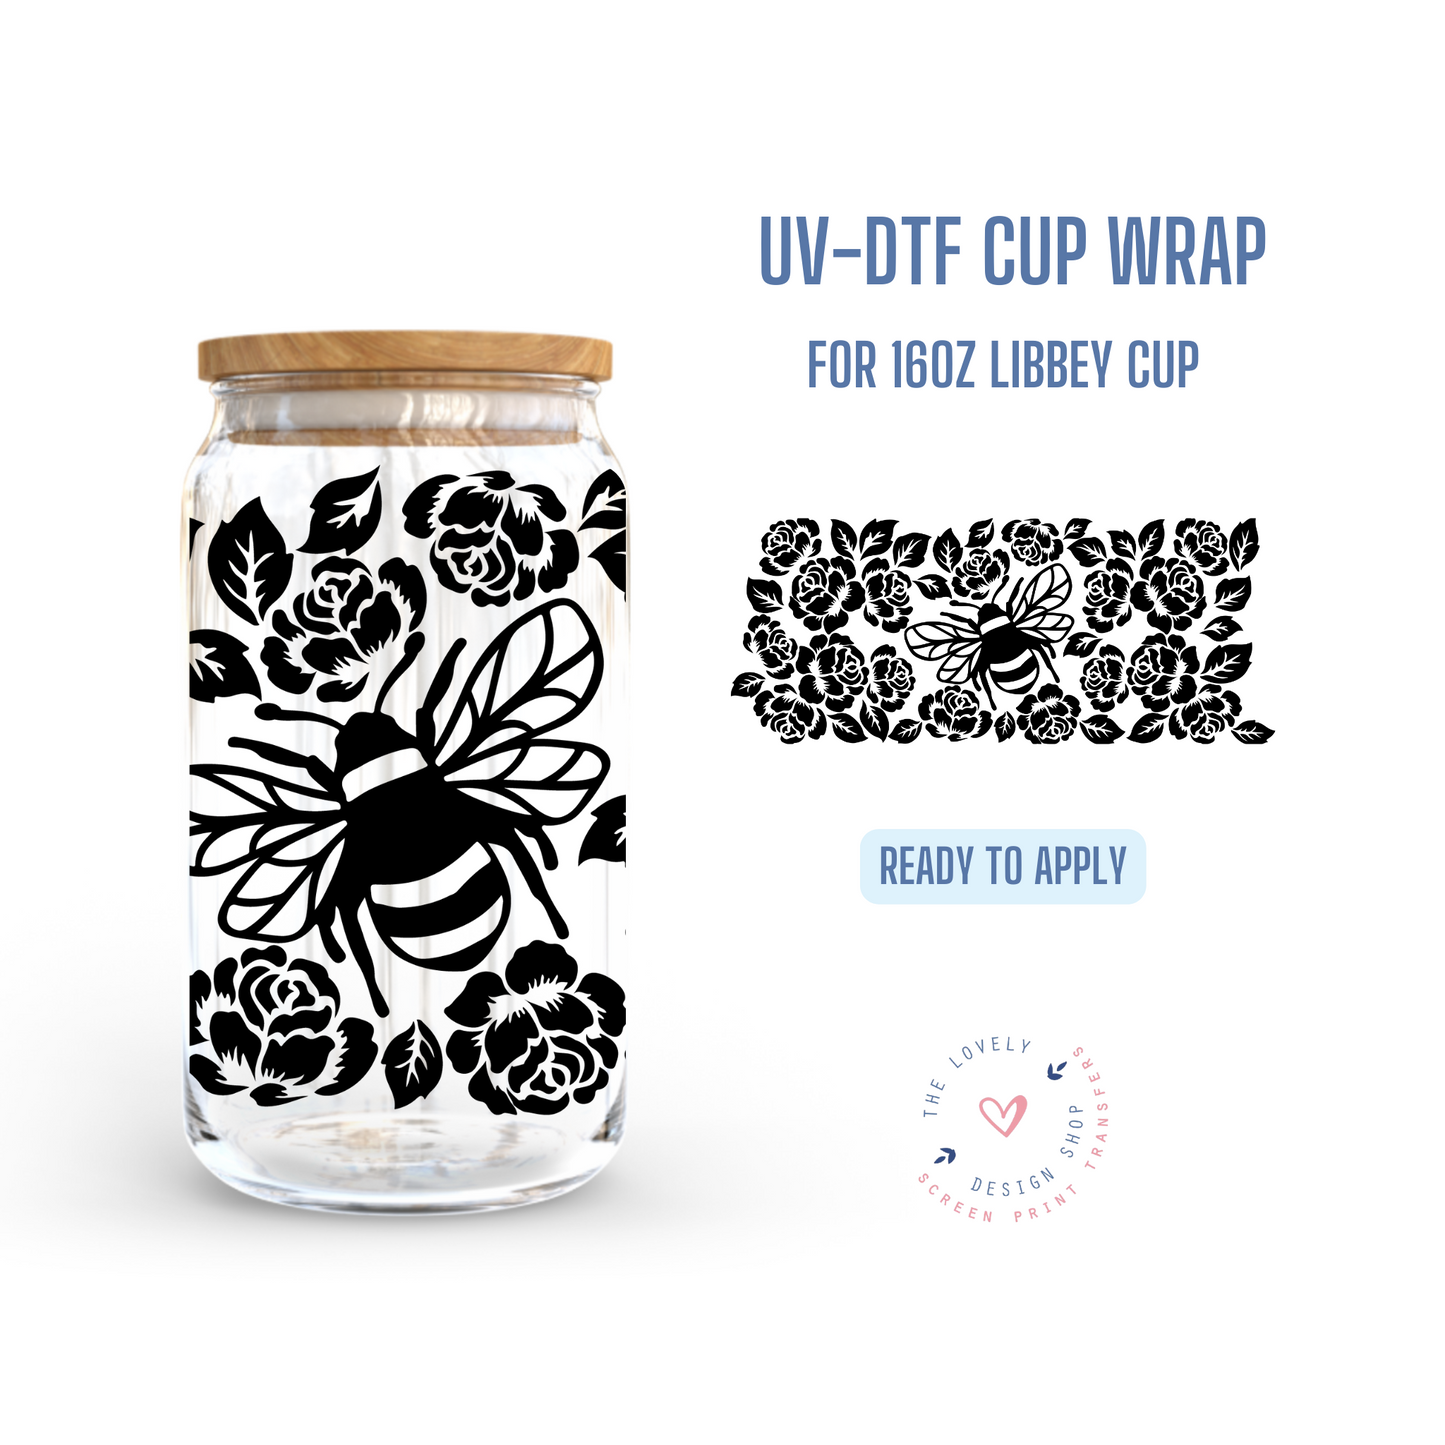 Bee Rose - UV DTF 16 oz Libbey Cup Wrap (Ready to Ship)